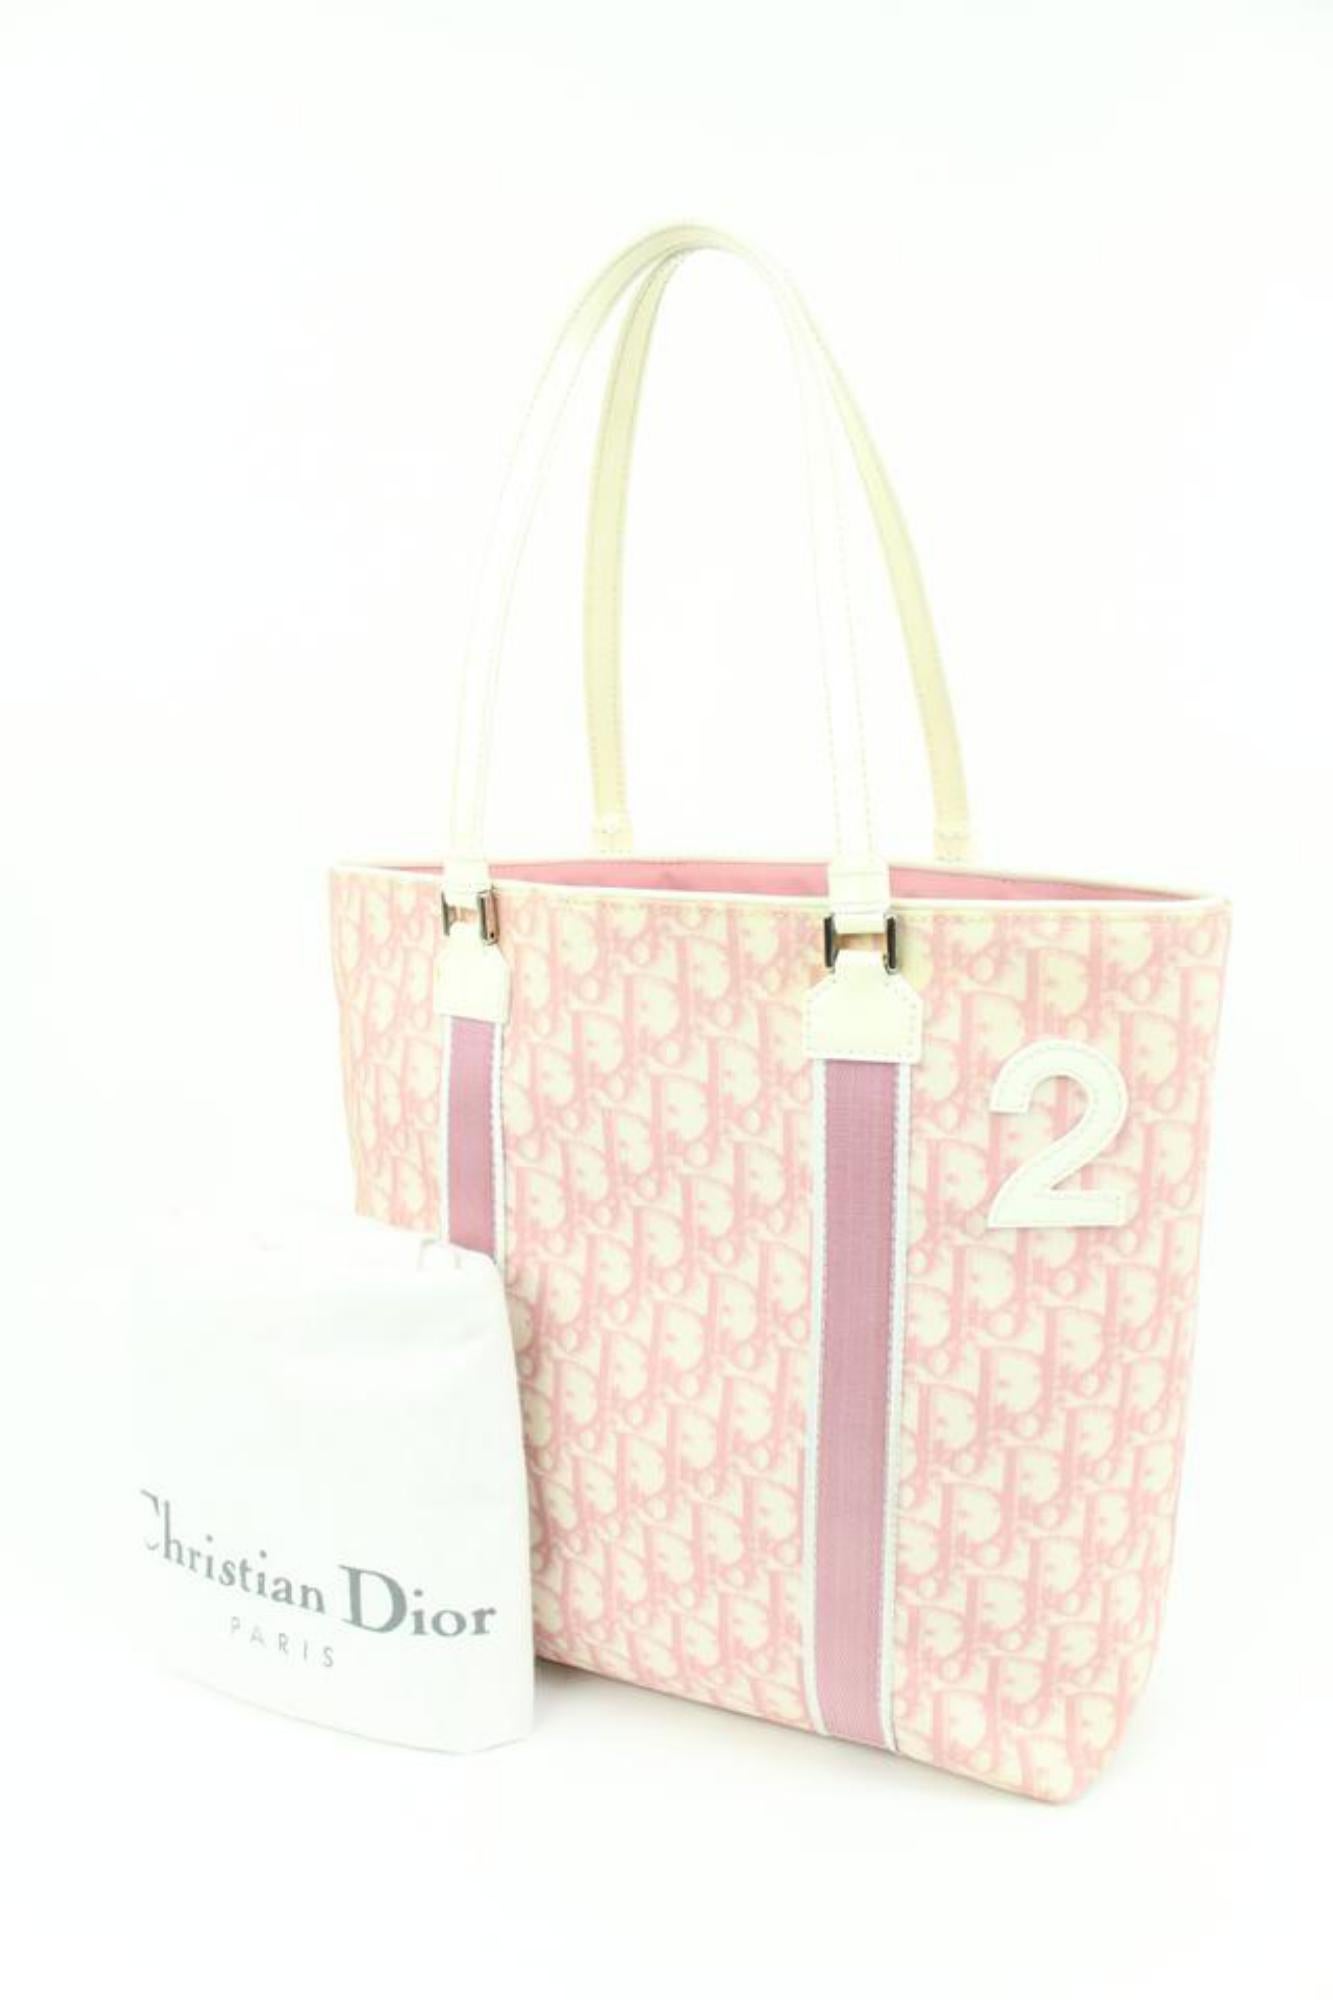 Dior Pink Monogram Trotter No. 2 Shopper Book Tote Upcycle Ready 79d411s
Date Code/Serial Number: BO C 1013
Made In: Italy
Measurements: Length:  15